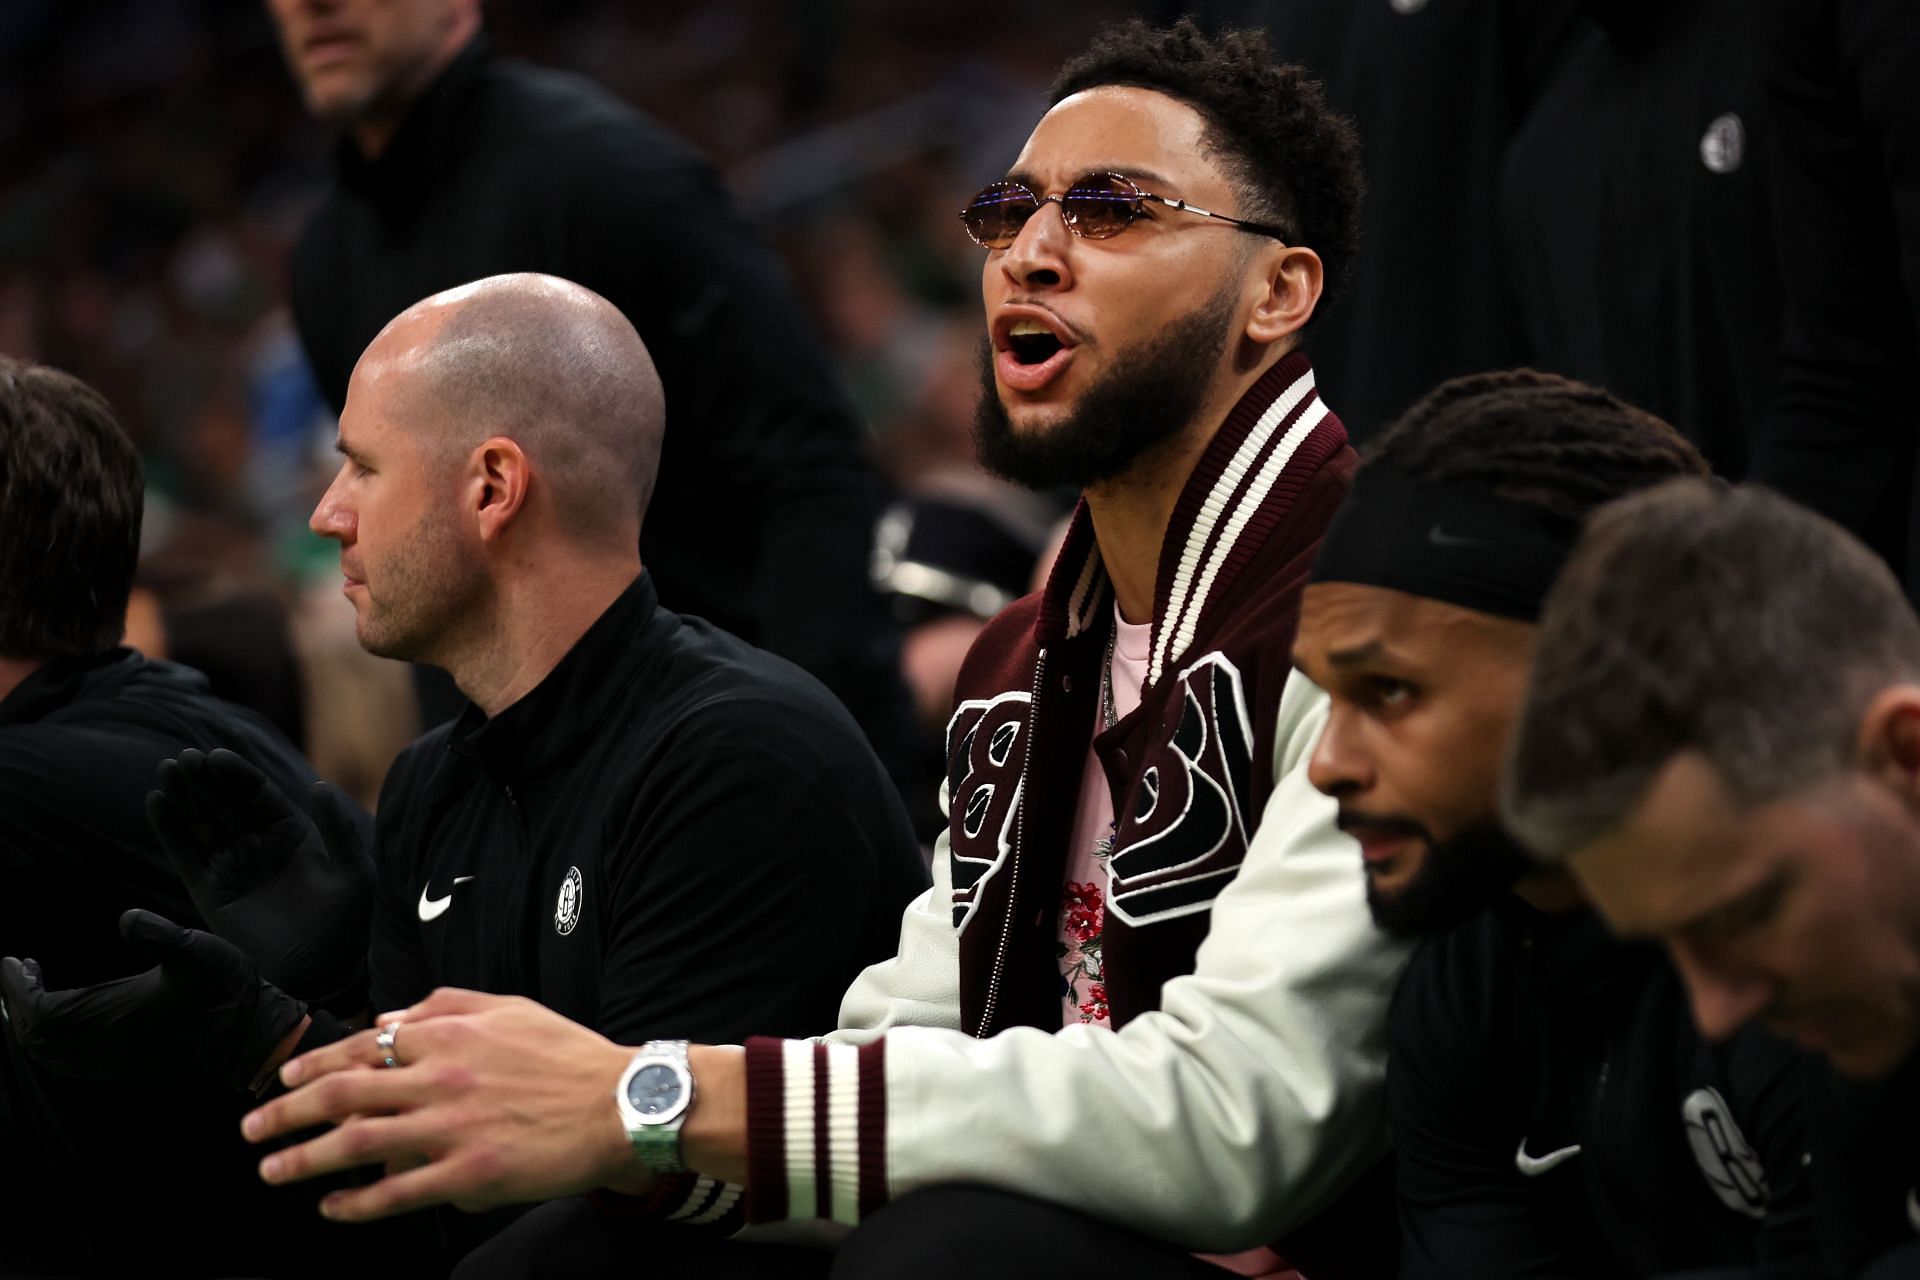 Ben Simmons is yet to play a game for the Brooklyn Nets